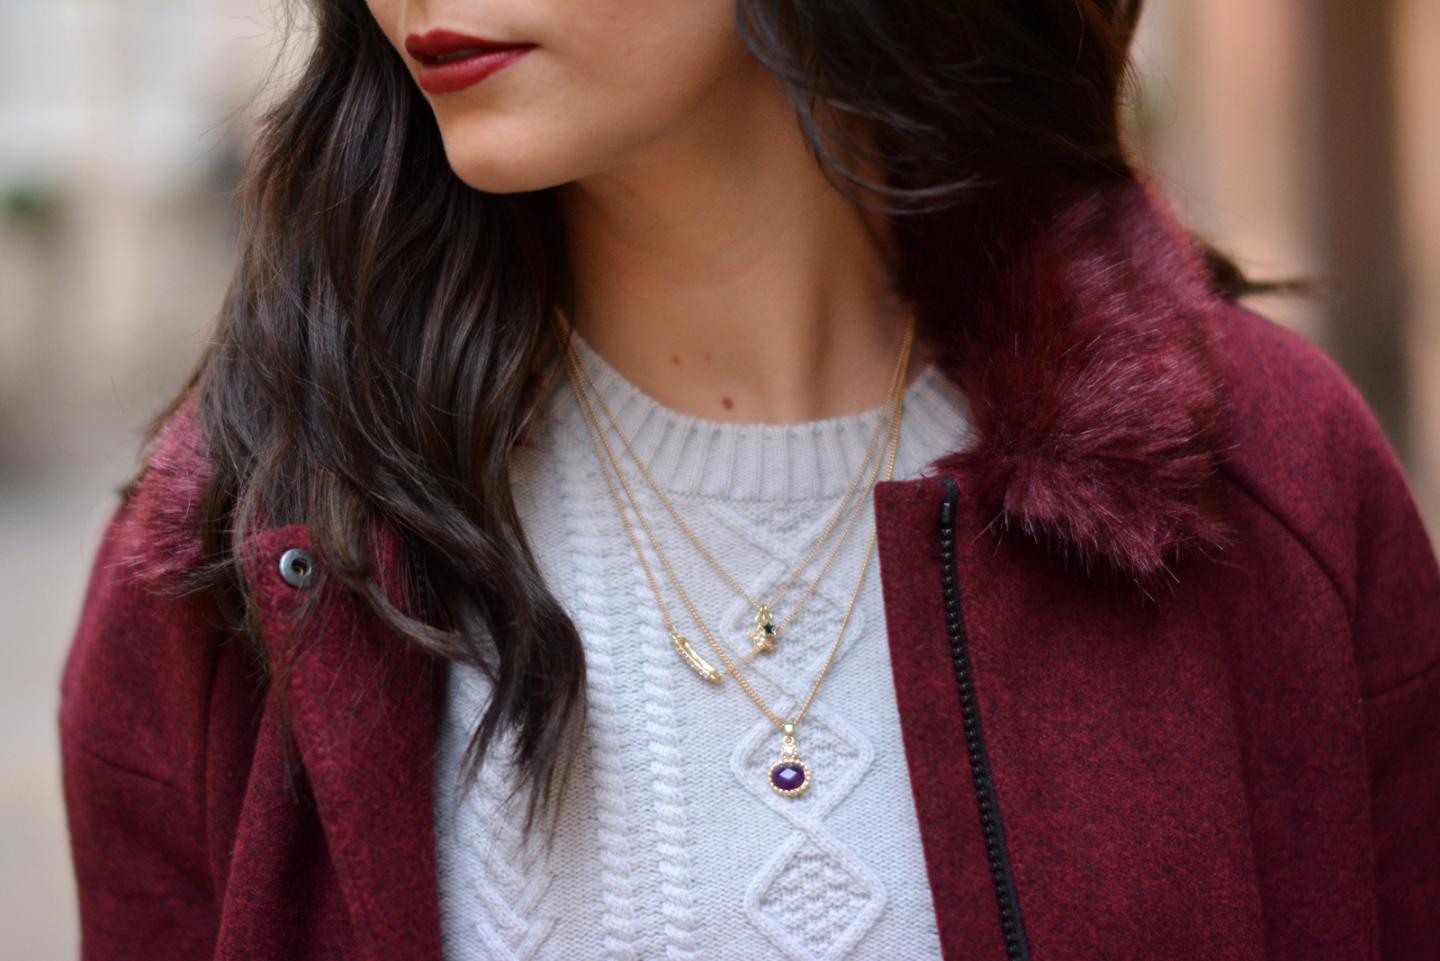 EJSTYLE - French Connection faux fur trim coat Foxy, Topshop Layered gold charm necklace, Freedom jewellery